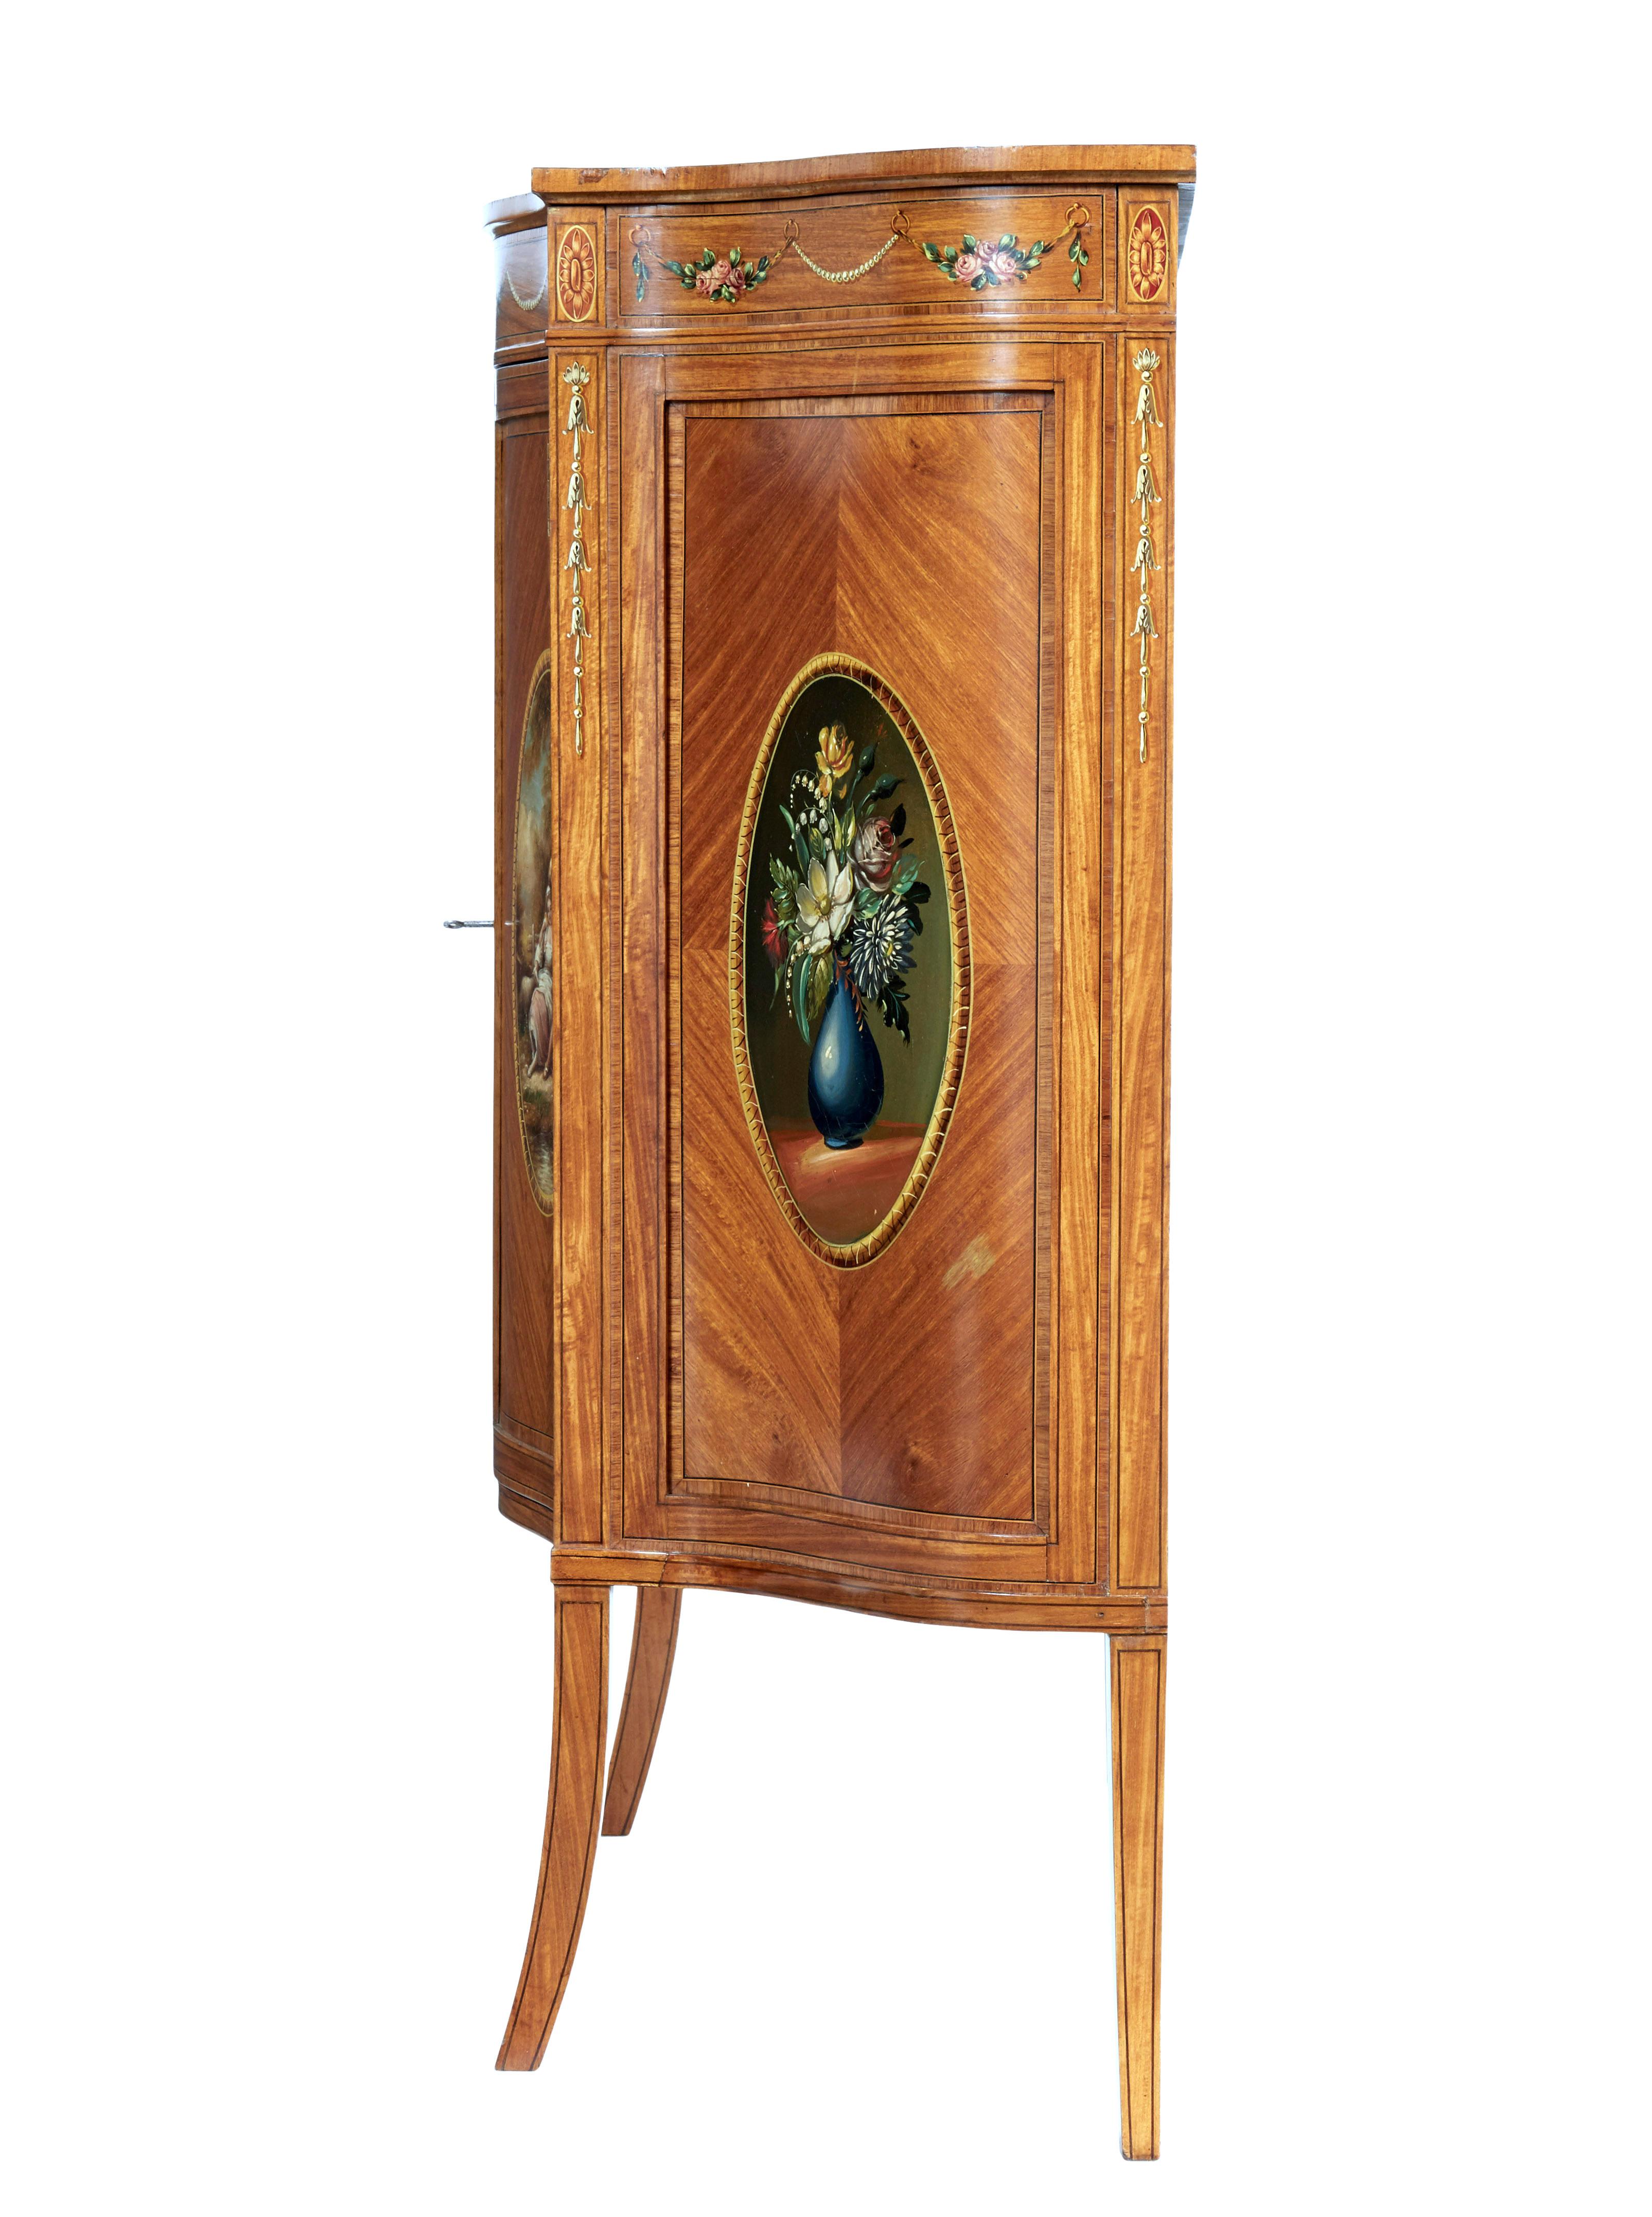 Sheraton 19th century sheraton revival satinwood inlaid and painted cabinet For Sale